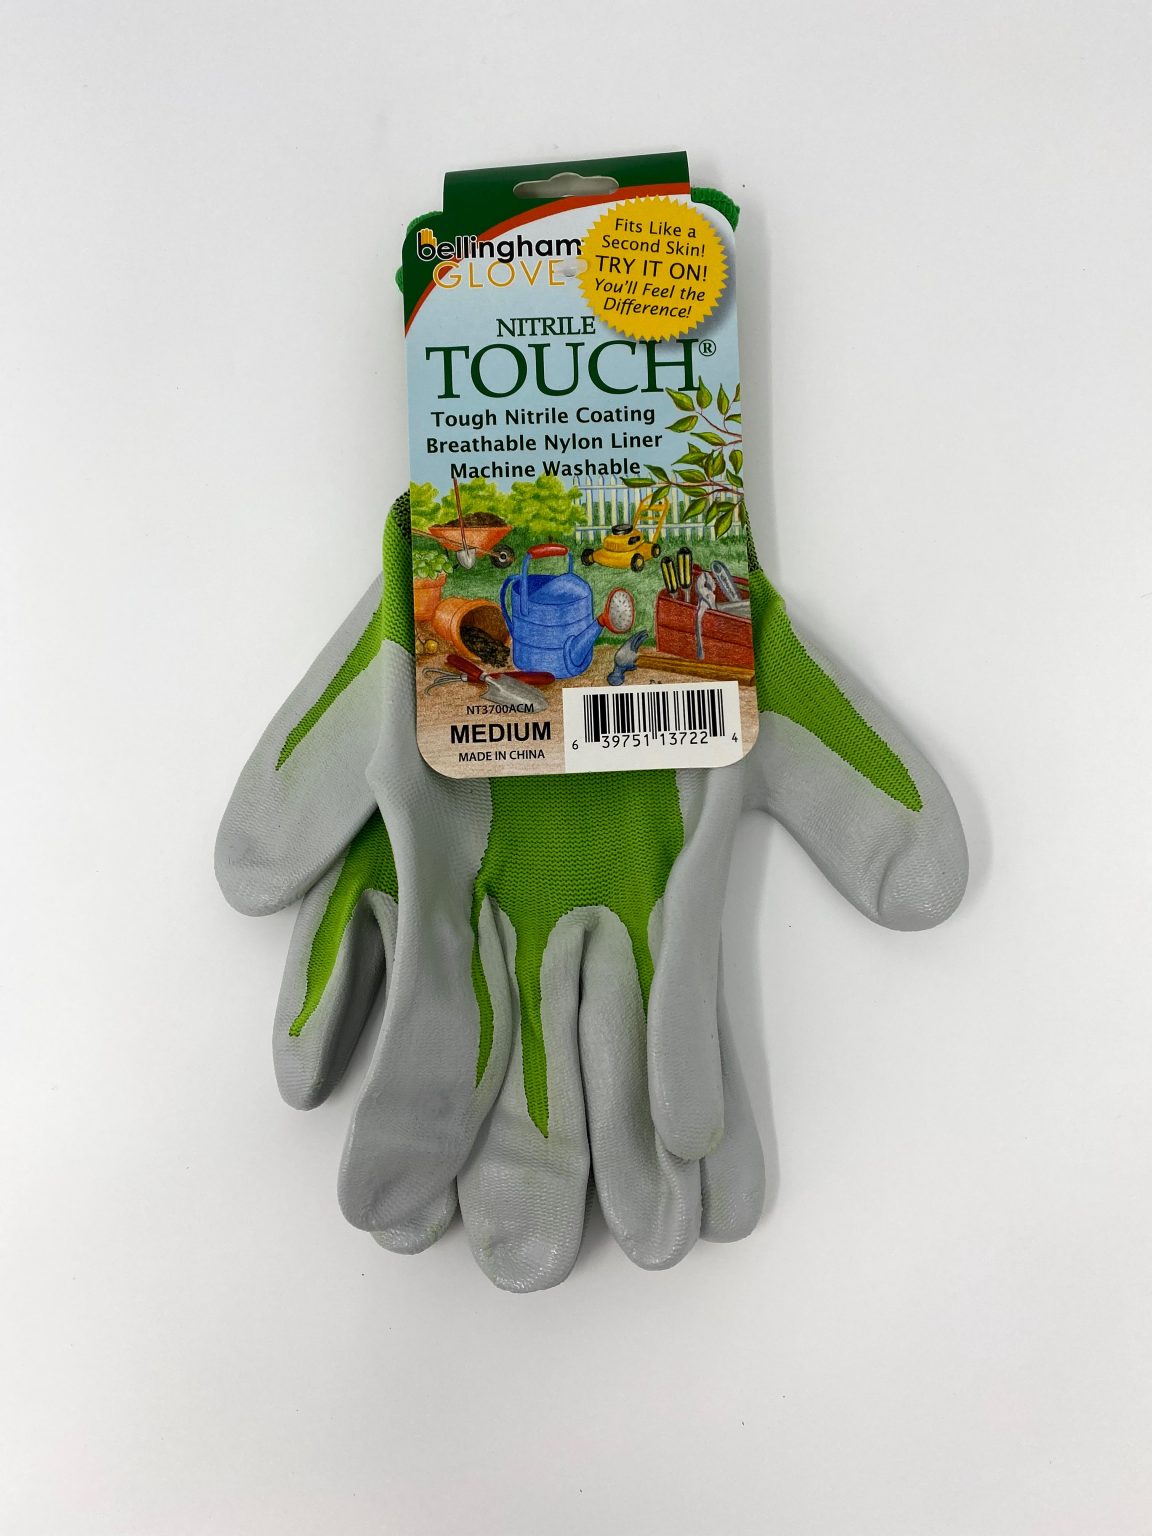 Nitrile TOUCH® Bellingham glove in green color